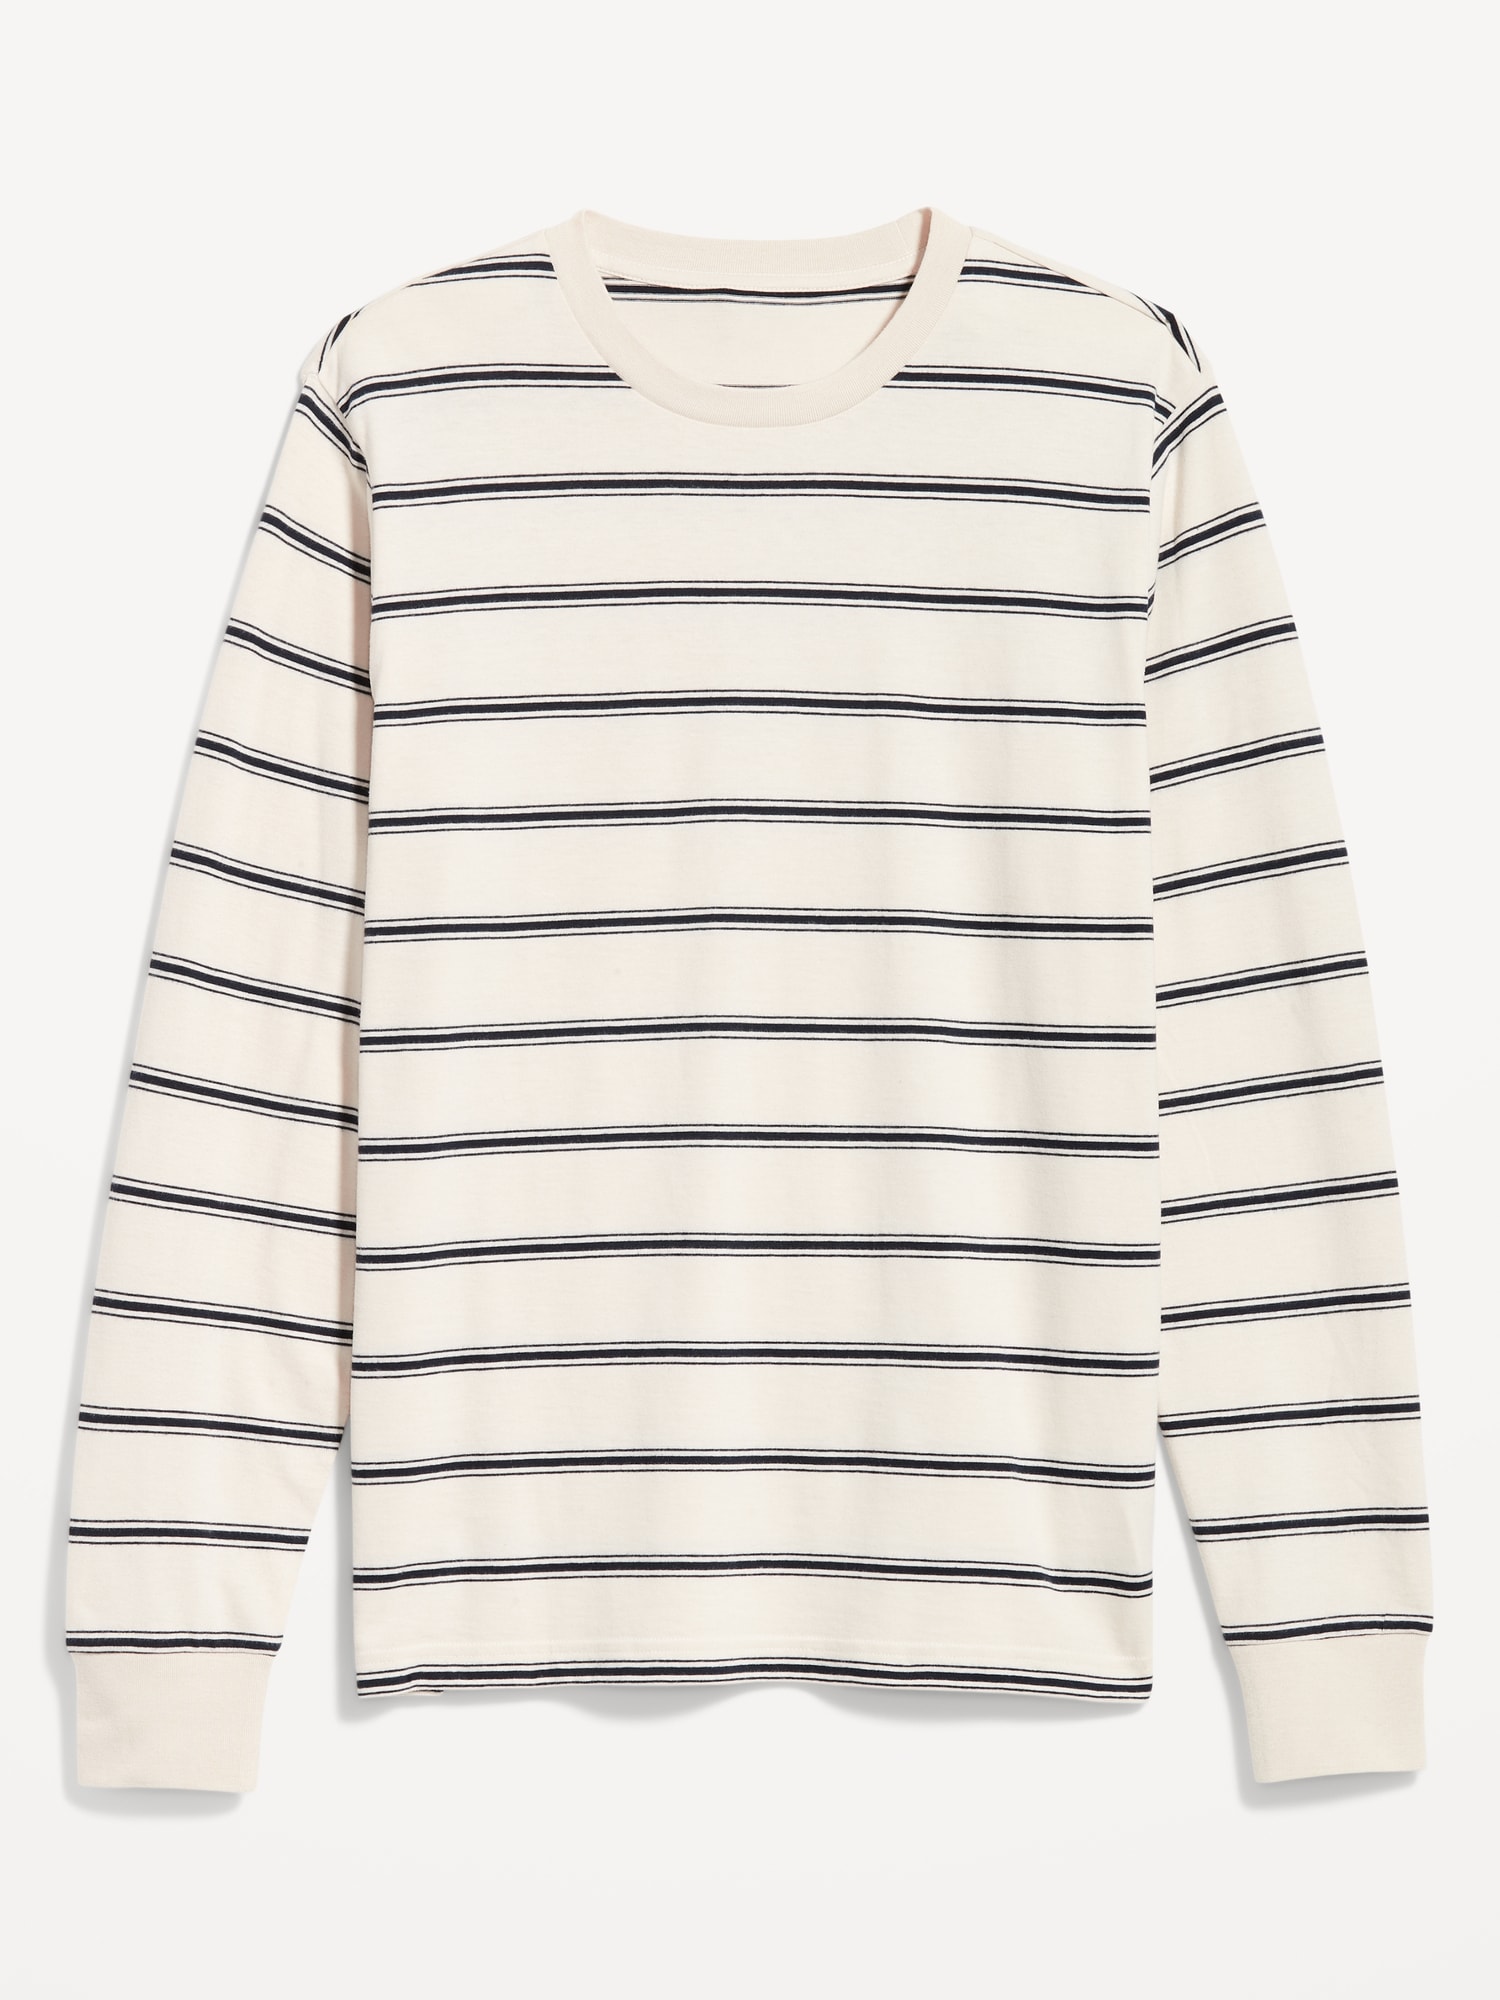 Black and White Striped Long-Sleeve T-Shirt